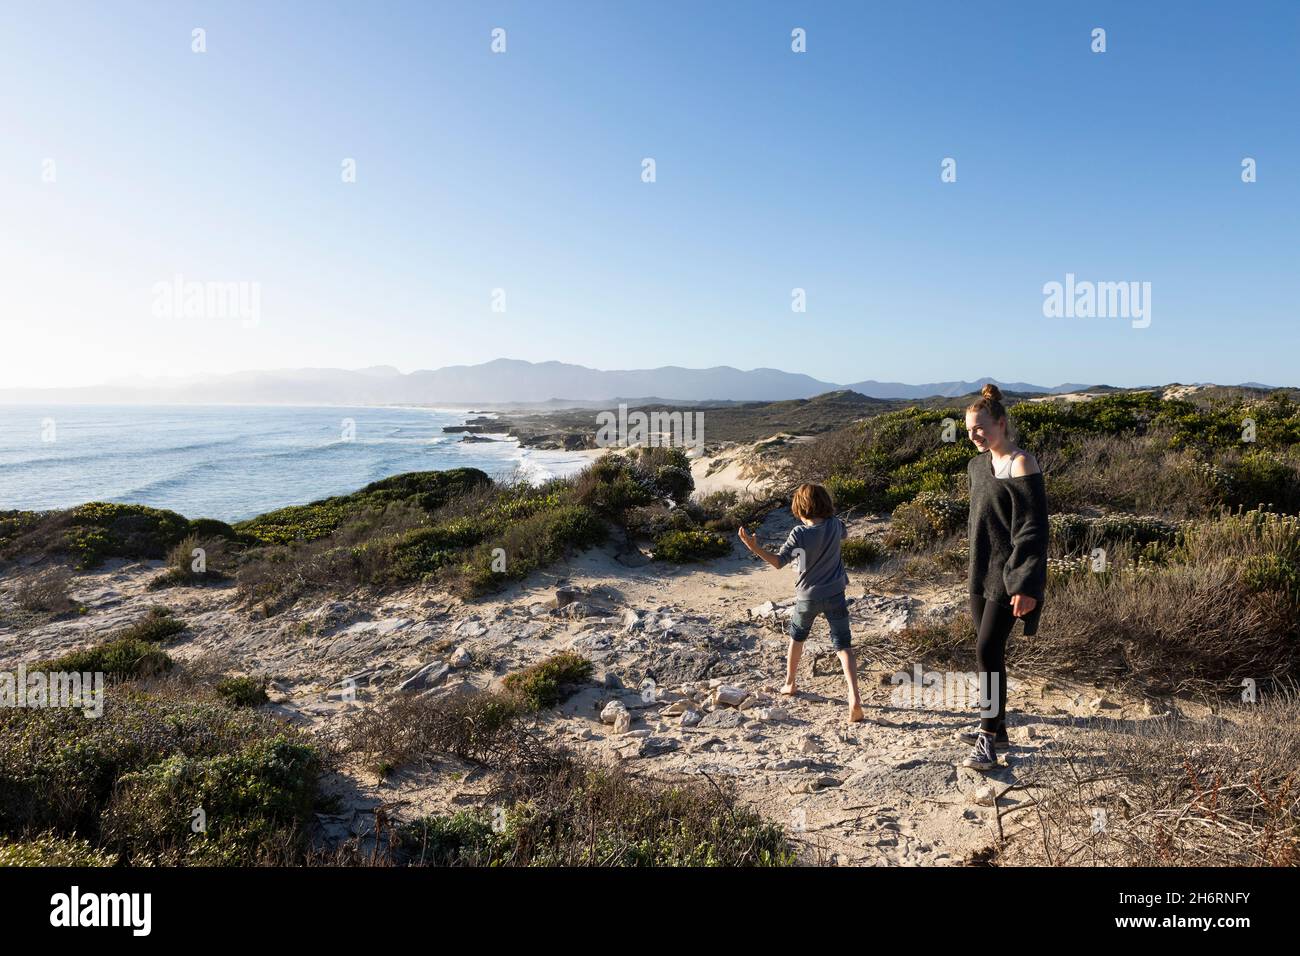 Two children, a teenager and her brother on a sandy path above a beach. Stock Photo